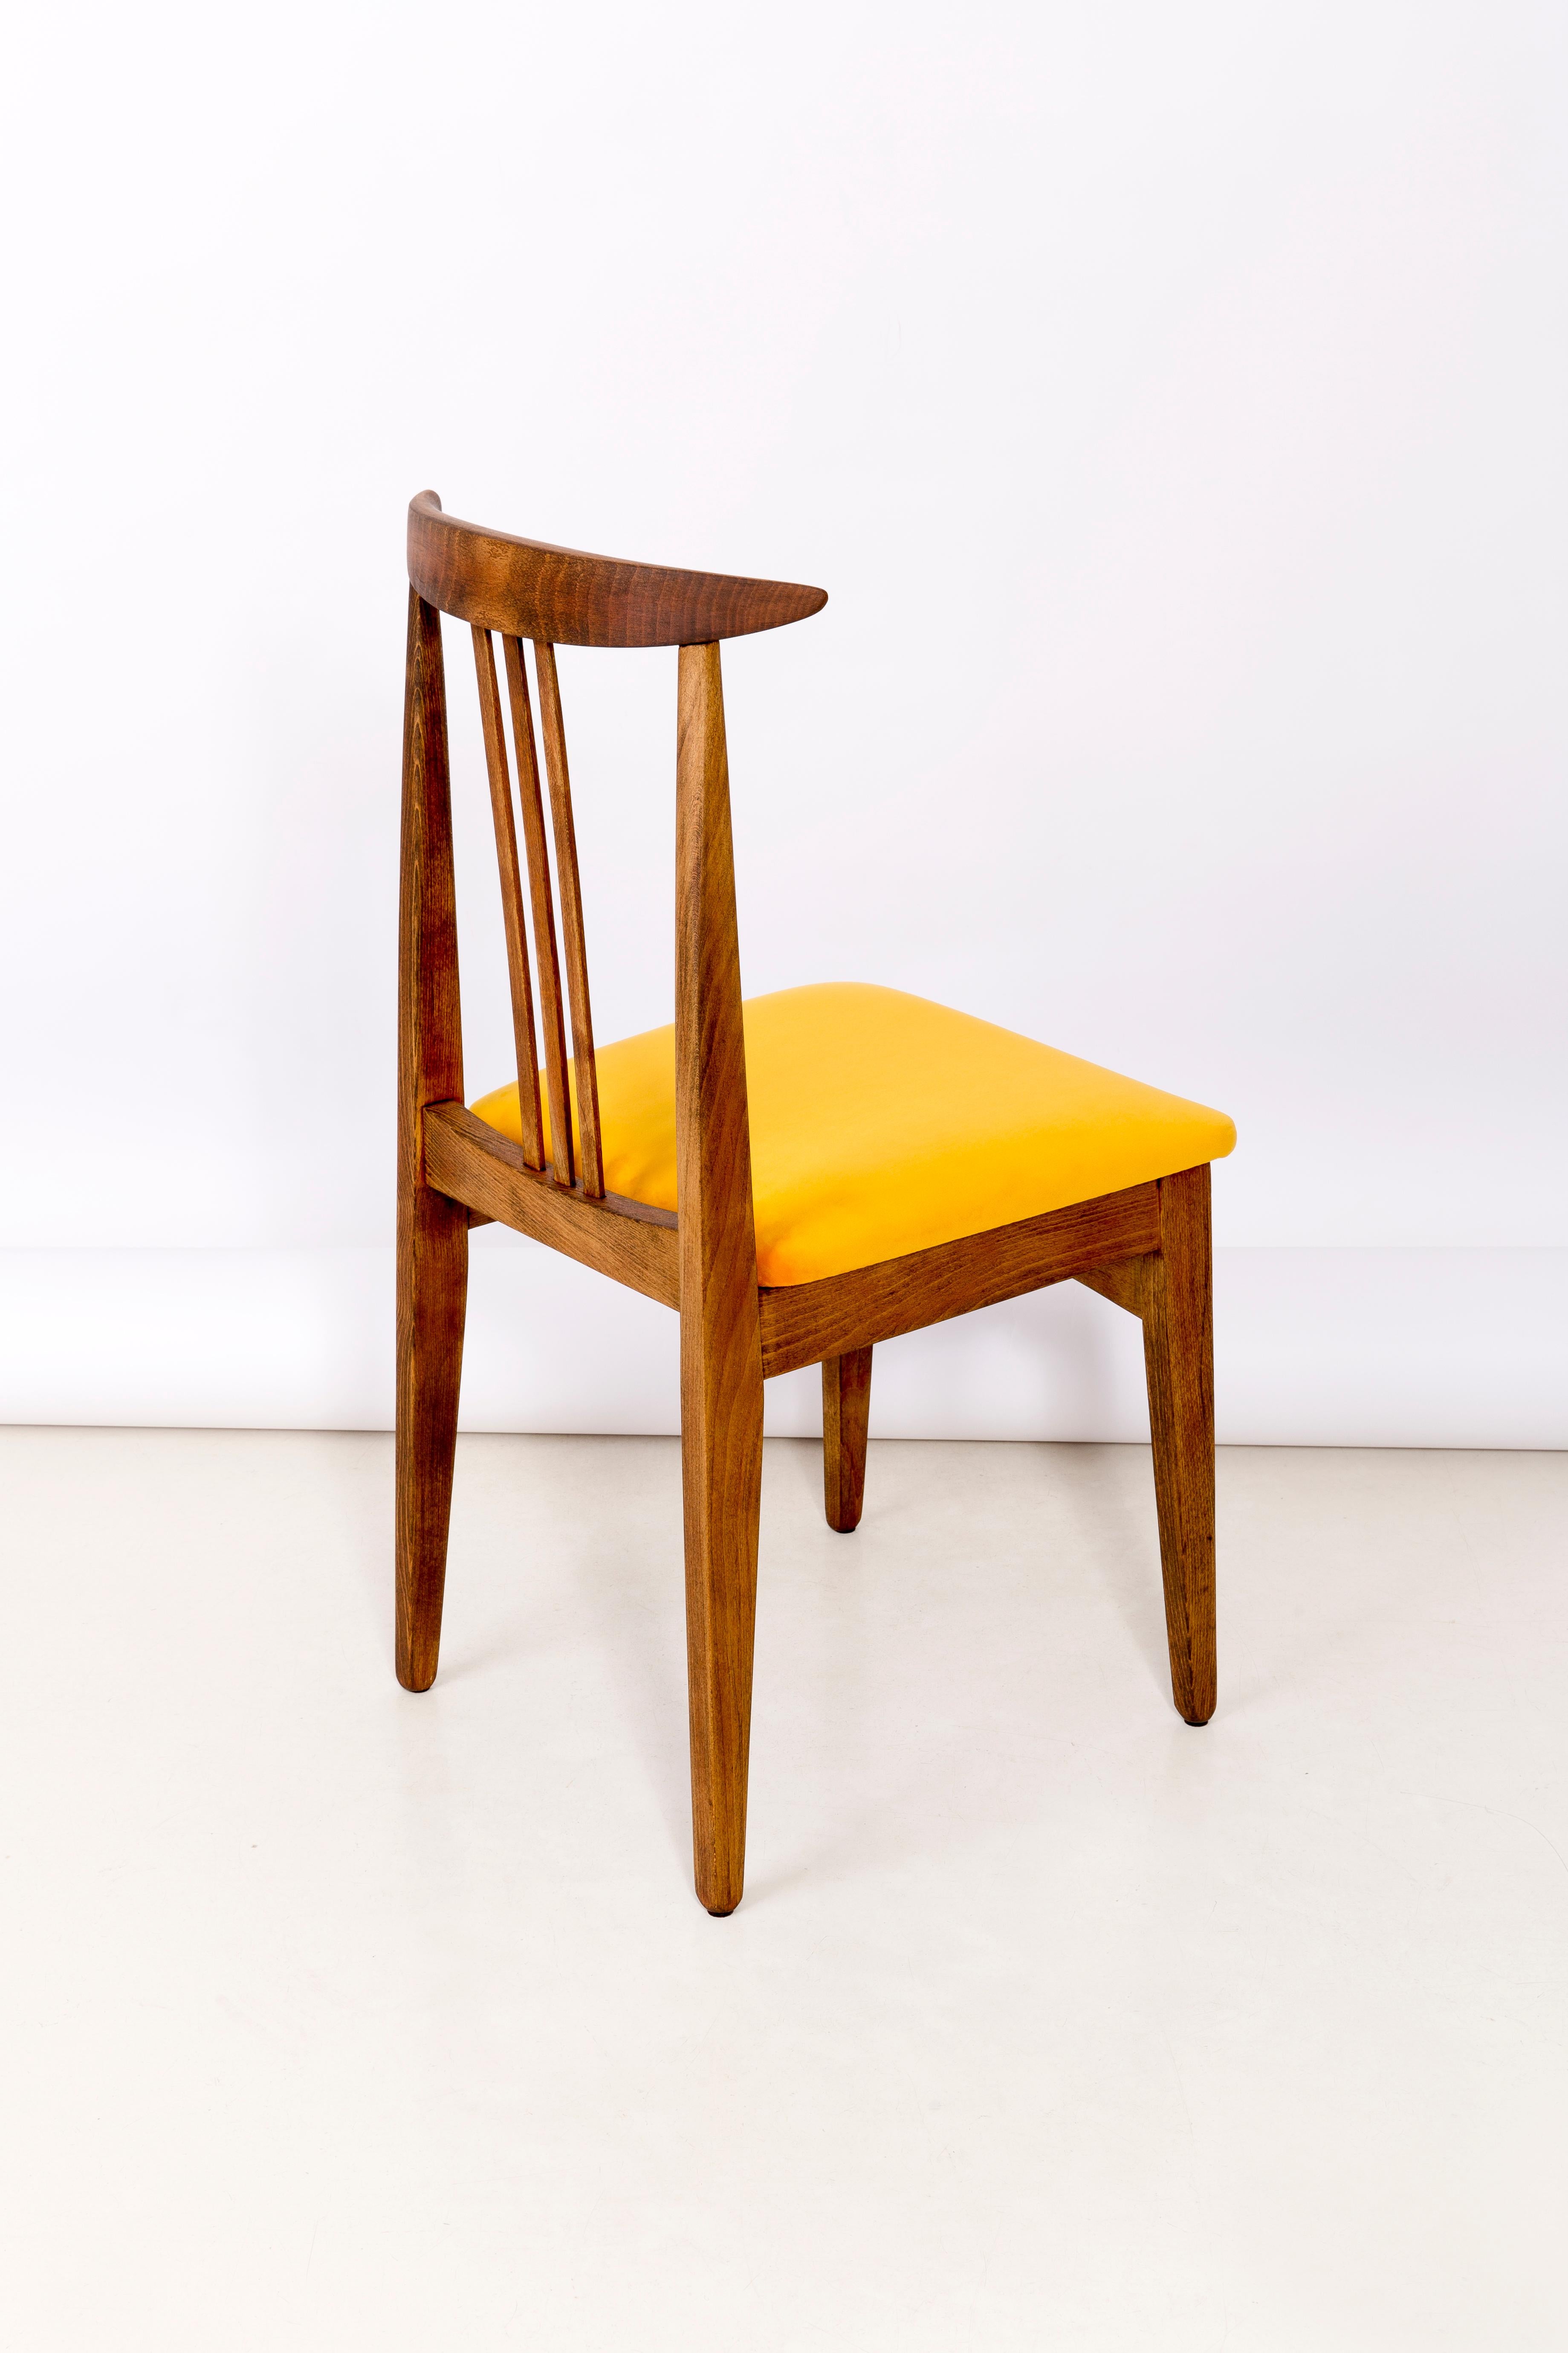 Velvet Set of Two Yellow Chairs, by Zielinski, Poland, 1960s For Sale